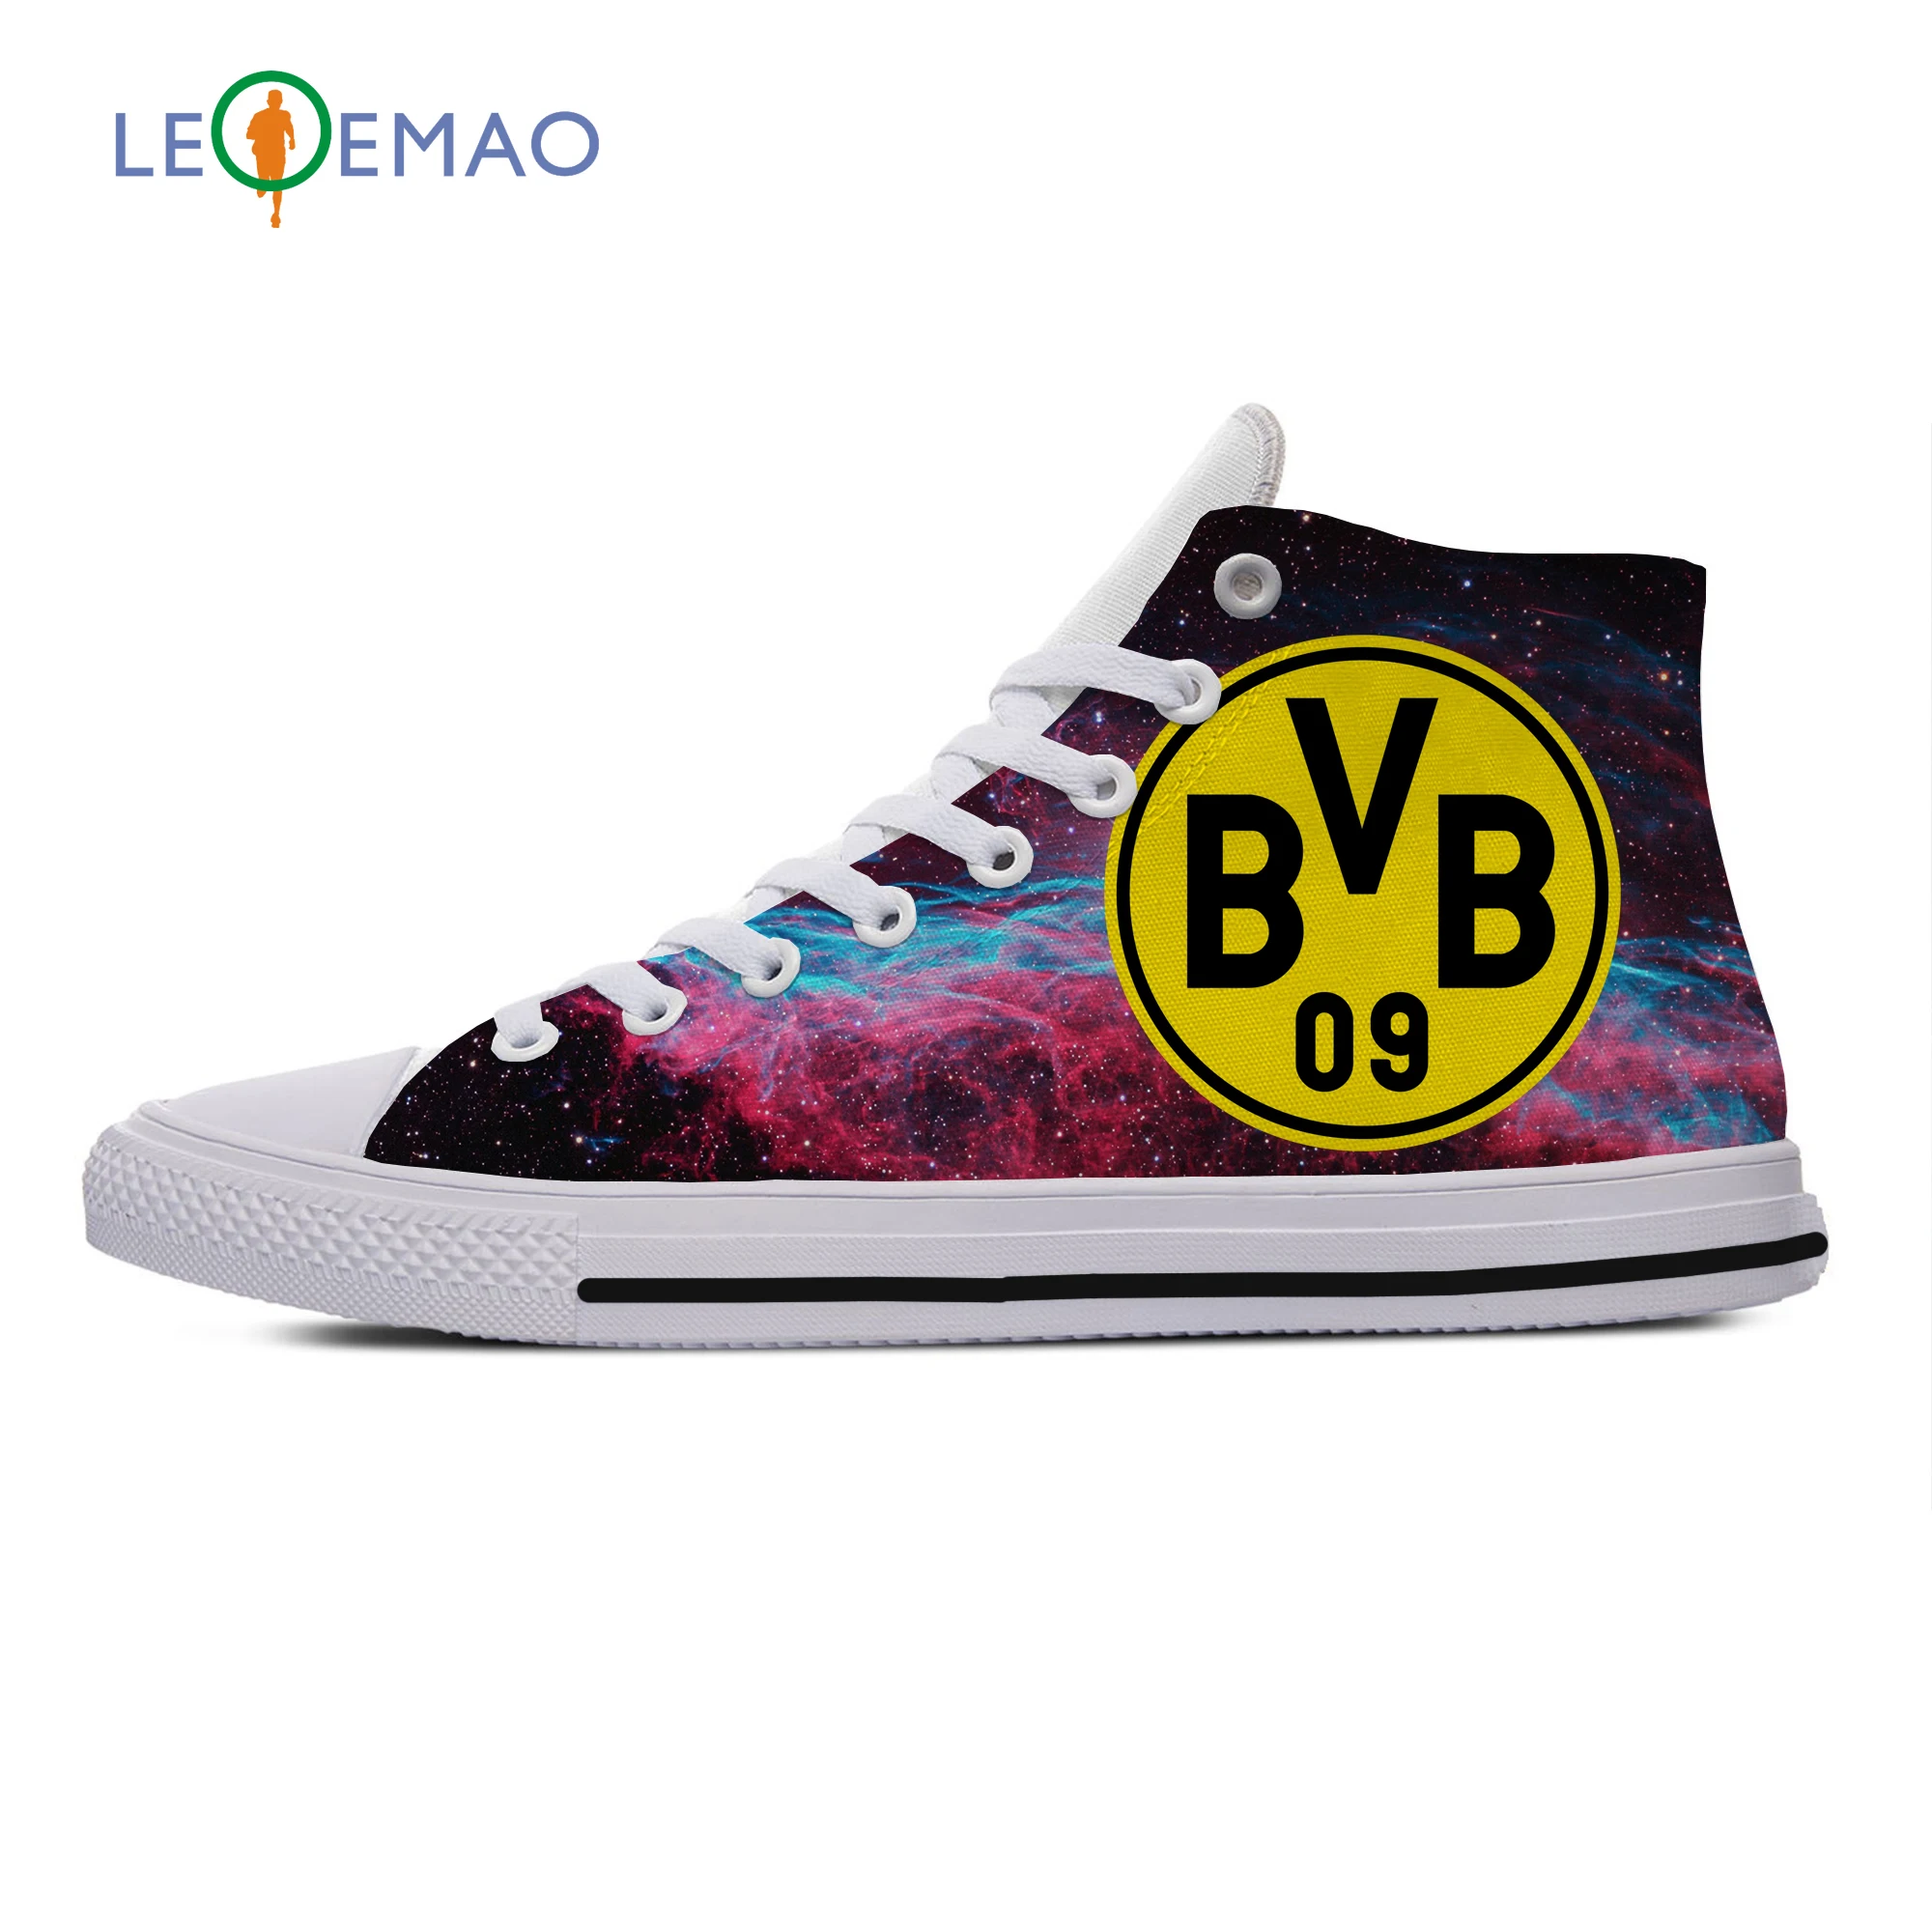 

Men's Women's Off White Sneakers Borussia FC Fans Breathable Soccer Lightweight Fashion Shoes Club Dortmund Canvas Sneakers